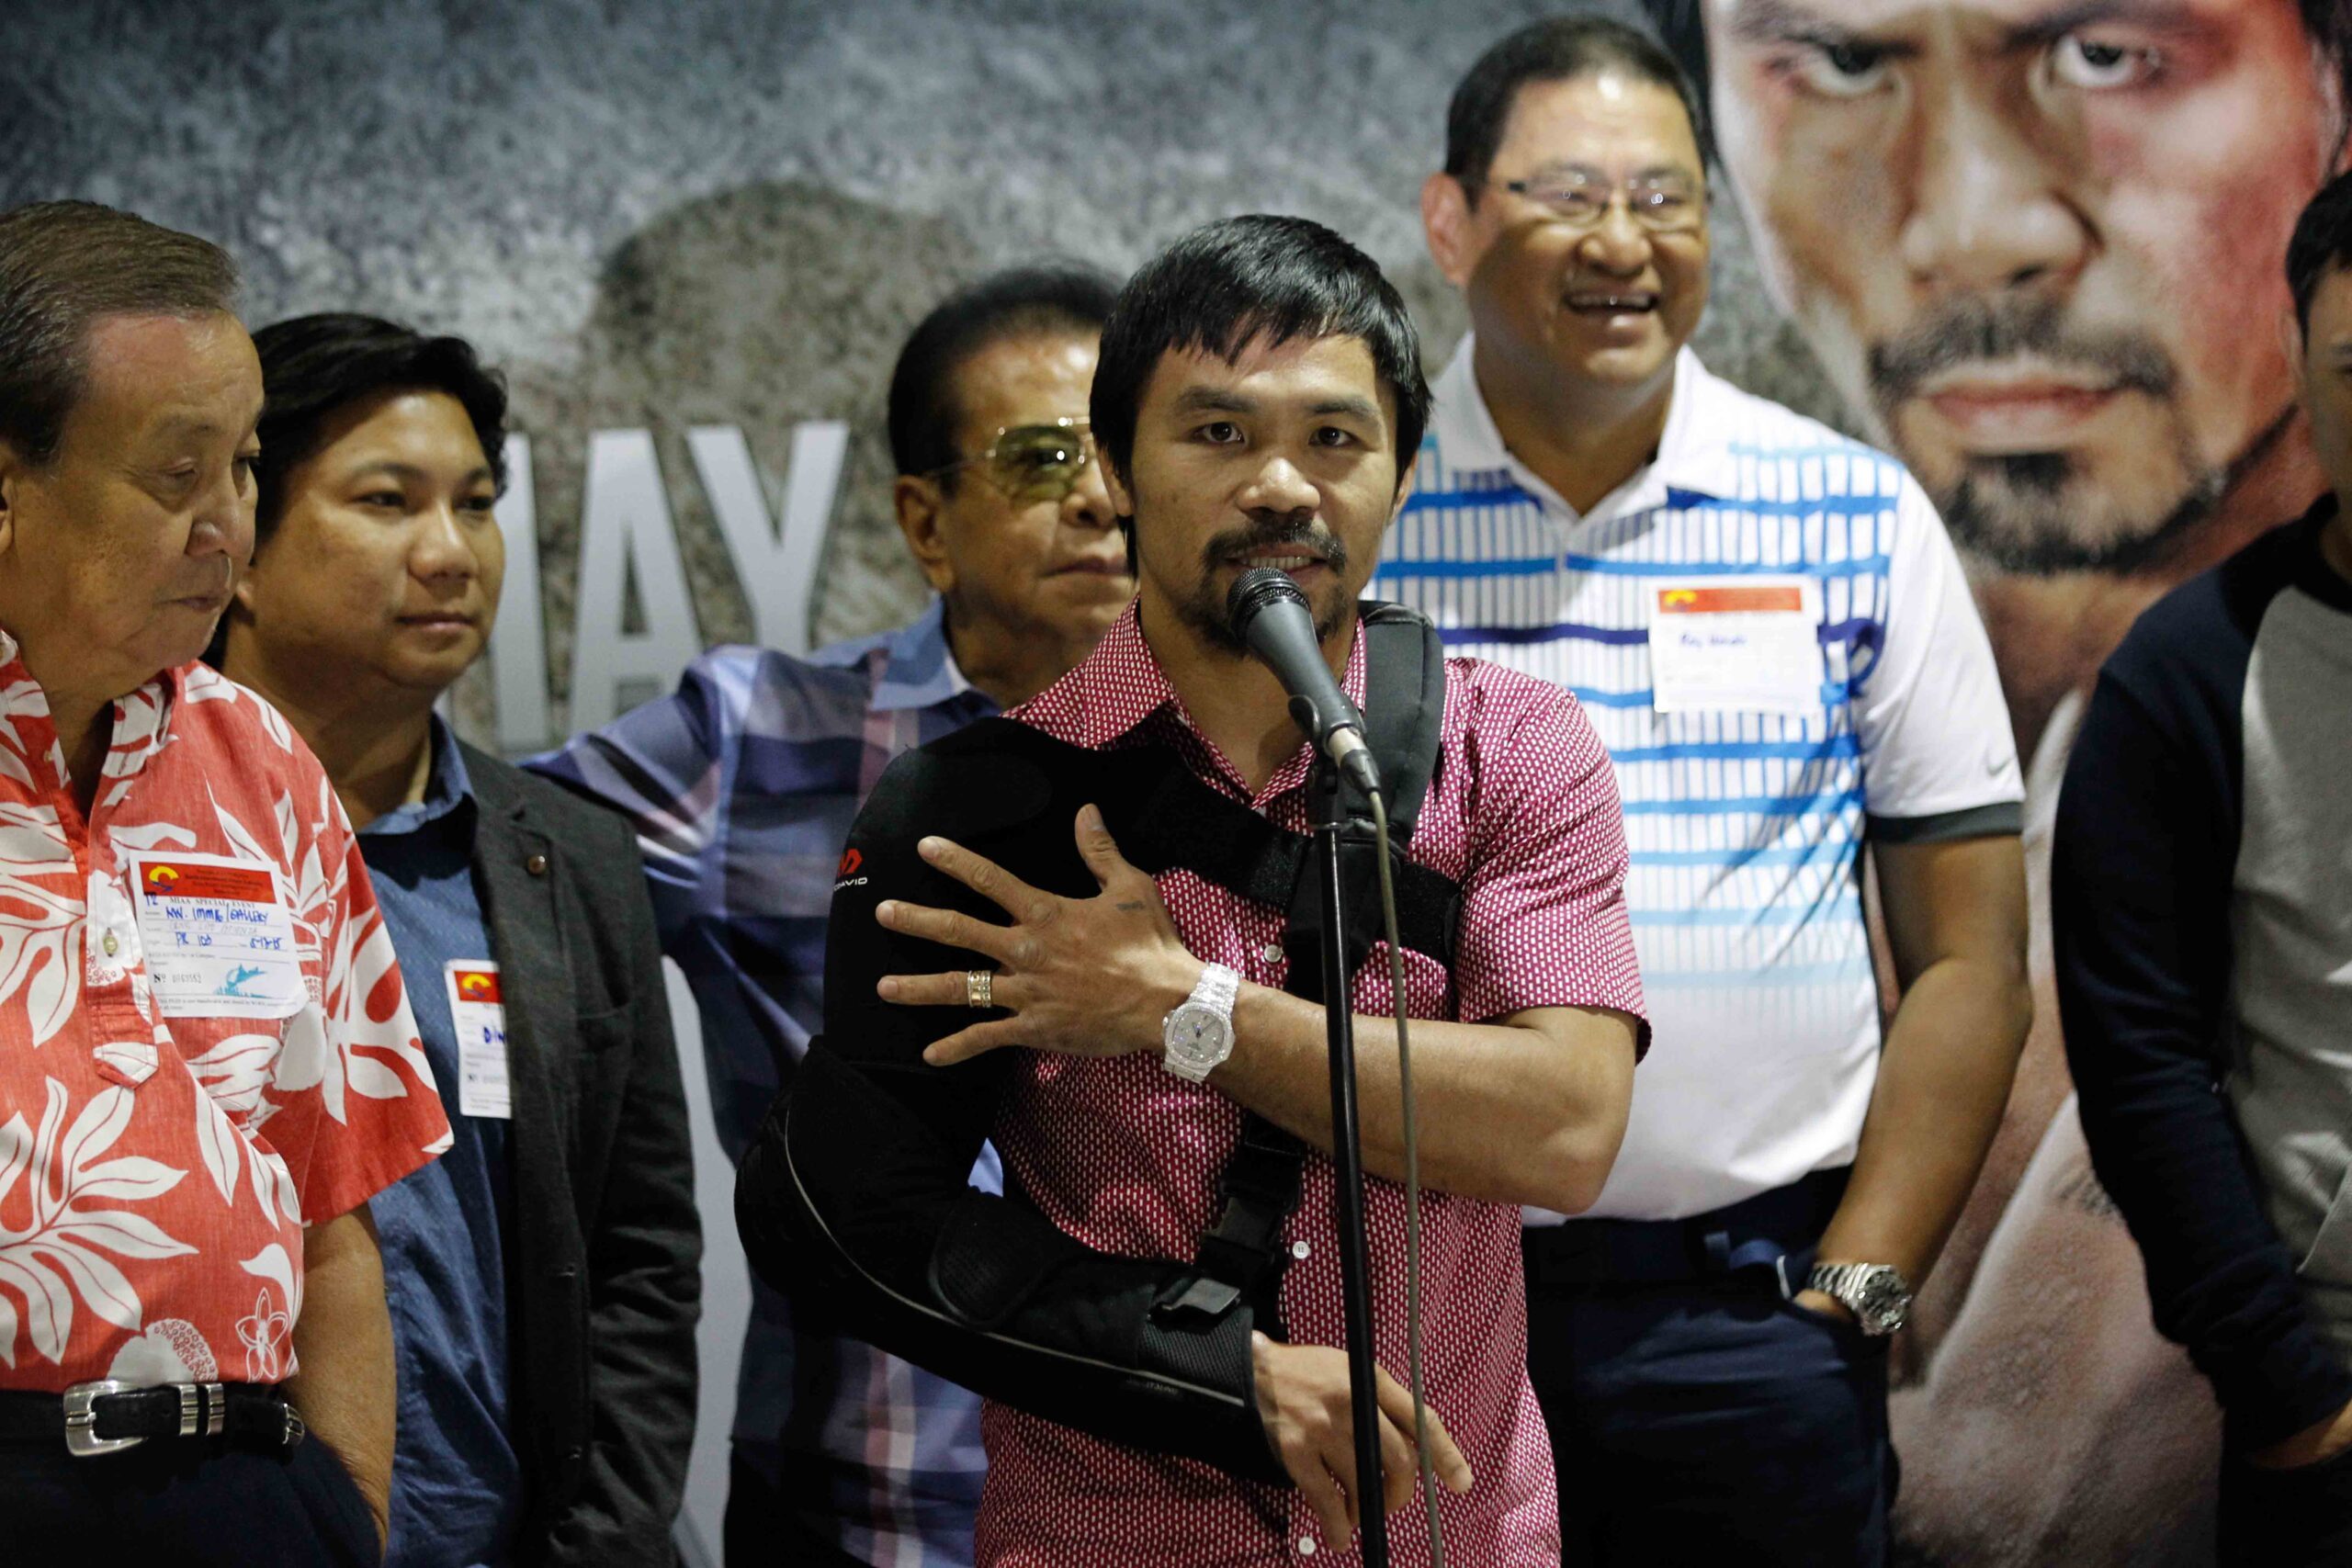 Manny Pacquiao: ‘I beat Floyd Mayweather by 2 points’